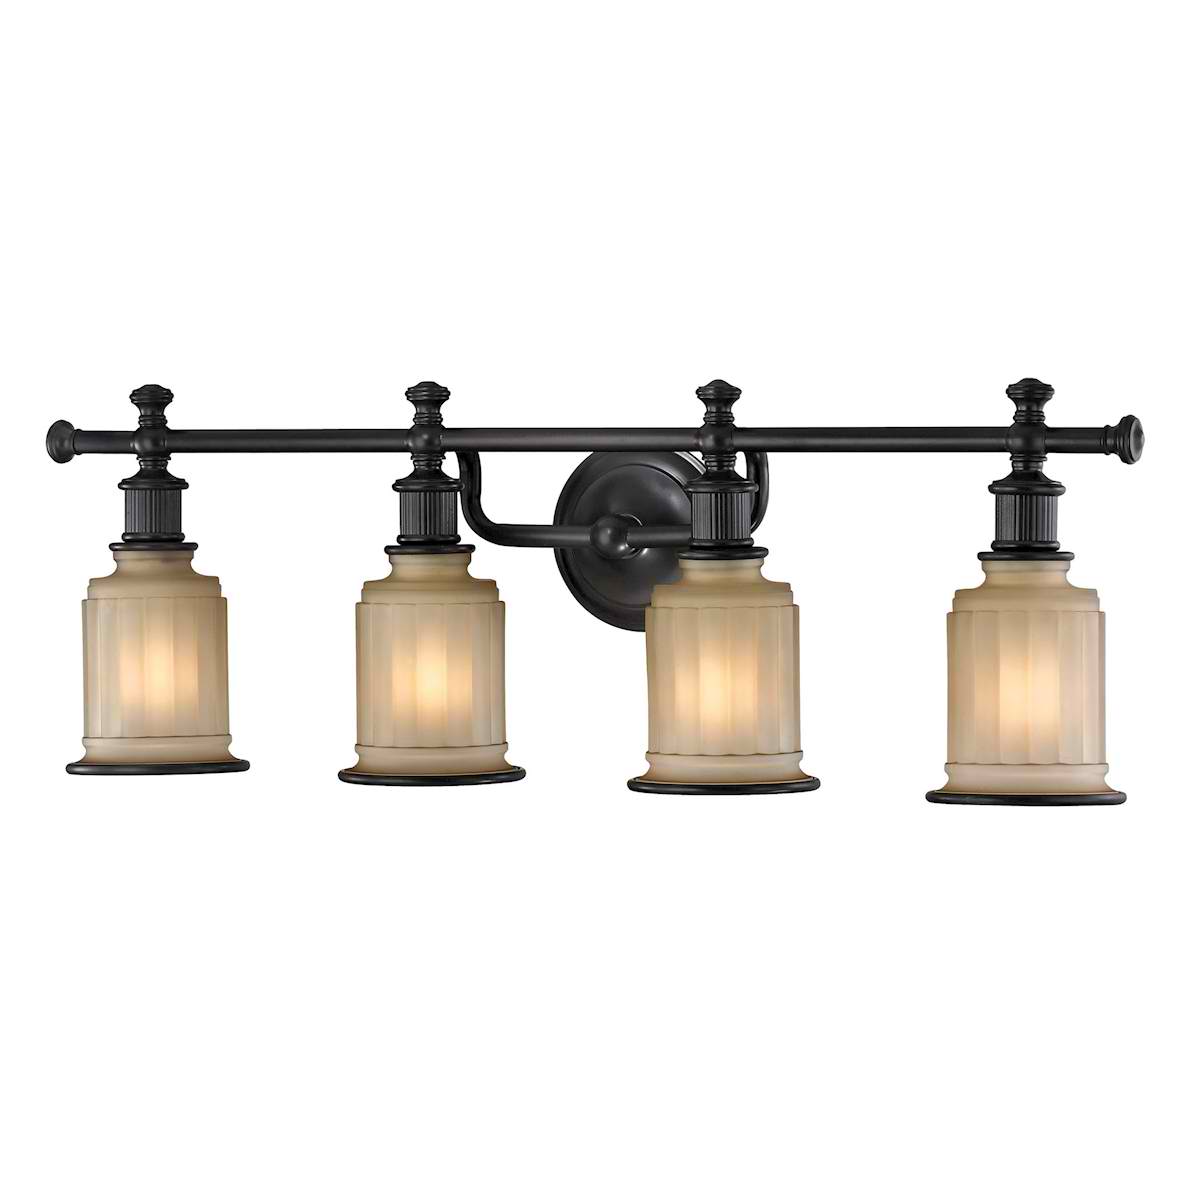 Acadia Collection 4 Light Bath in Oil Rubbed Bronze